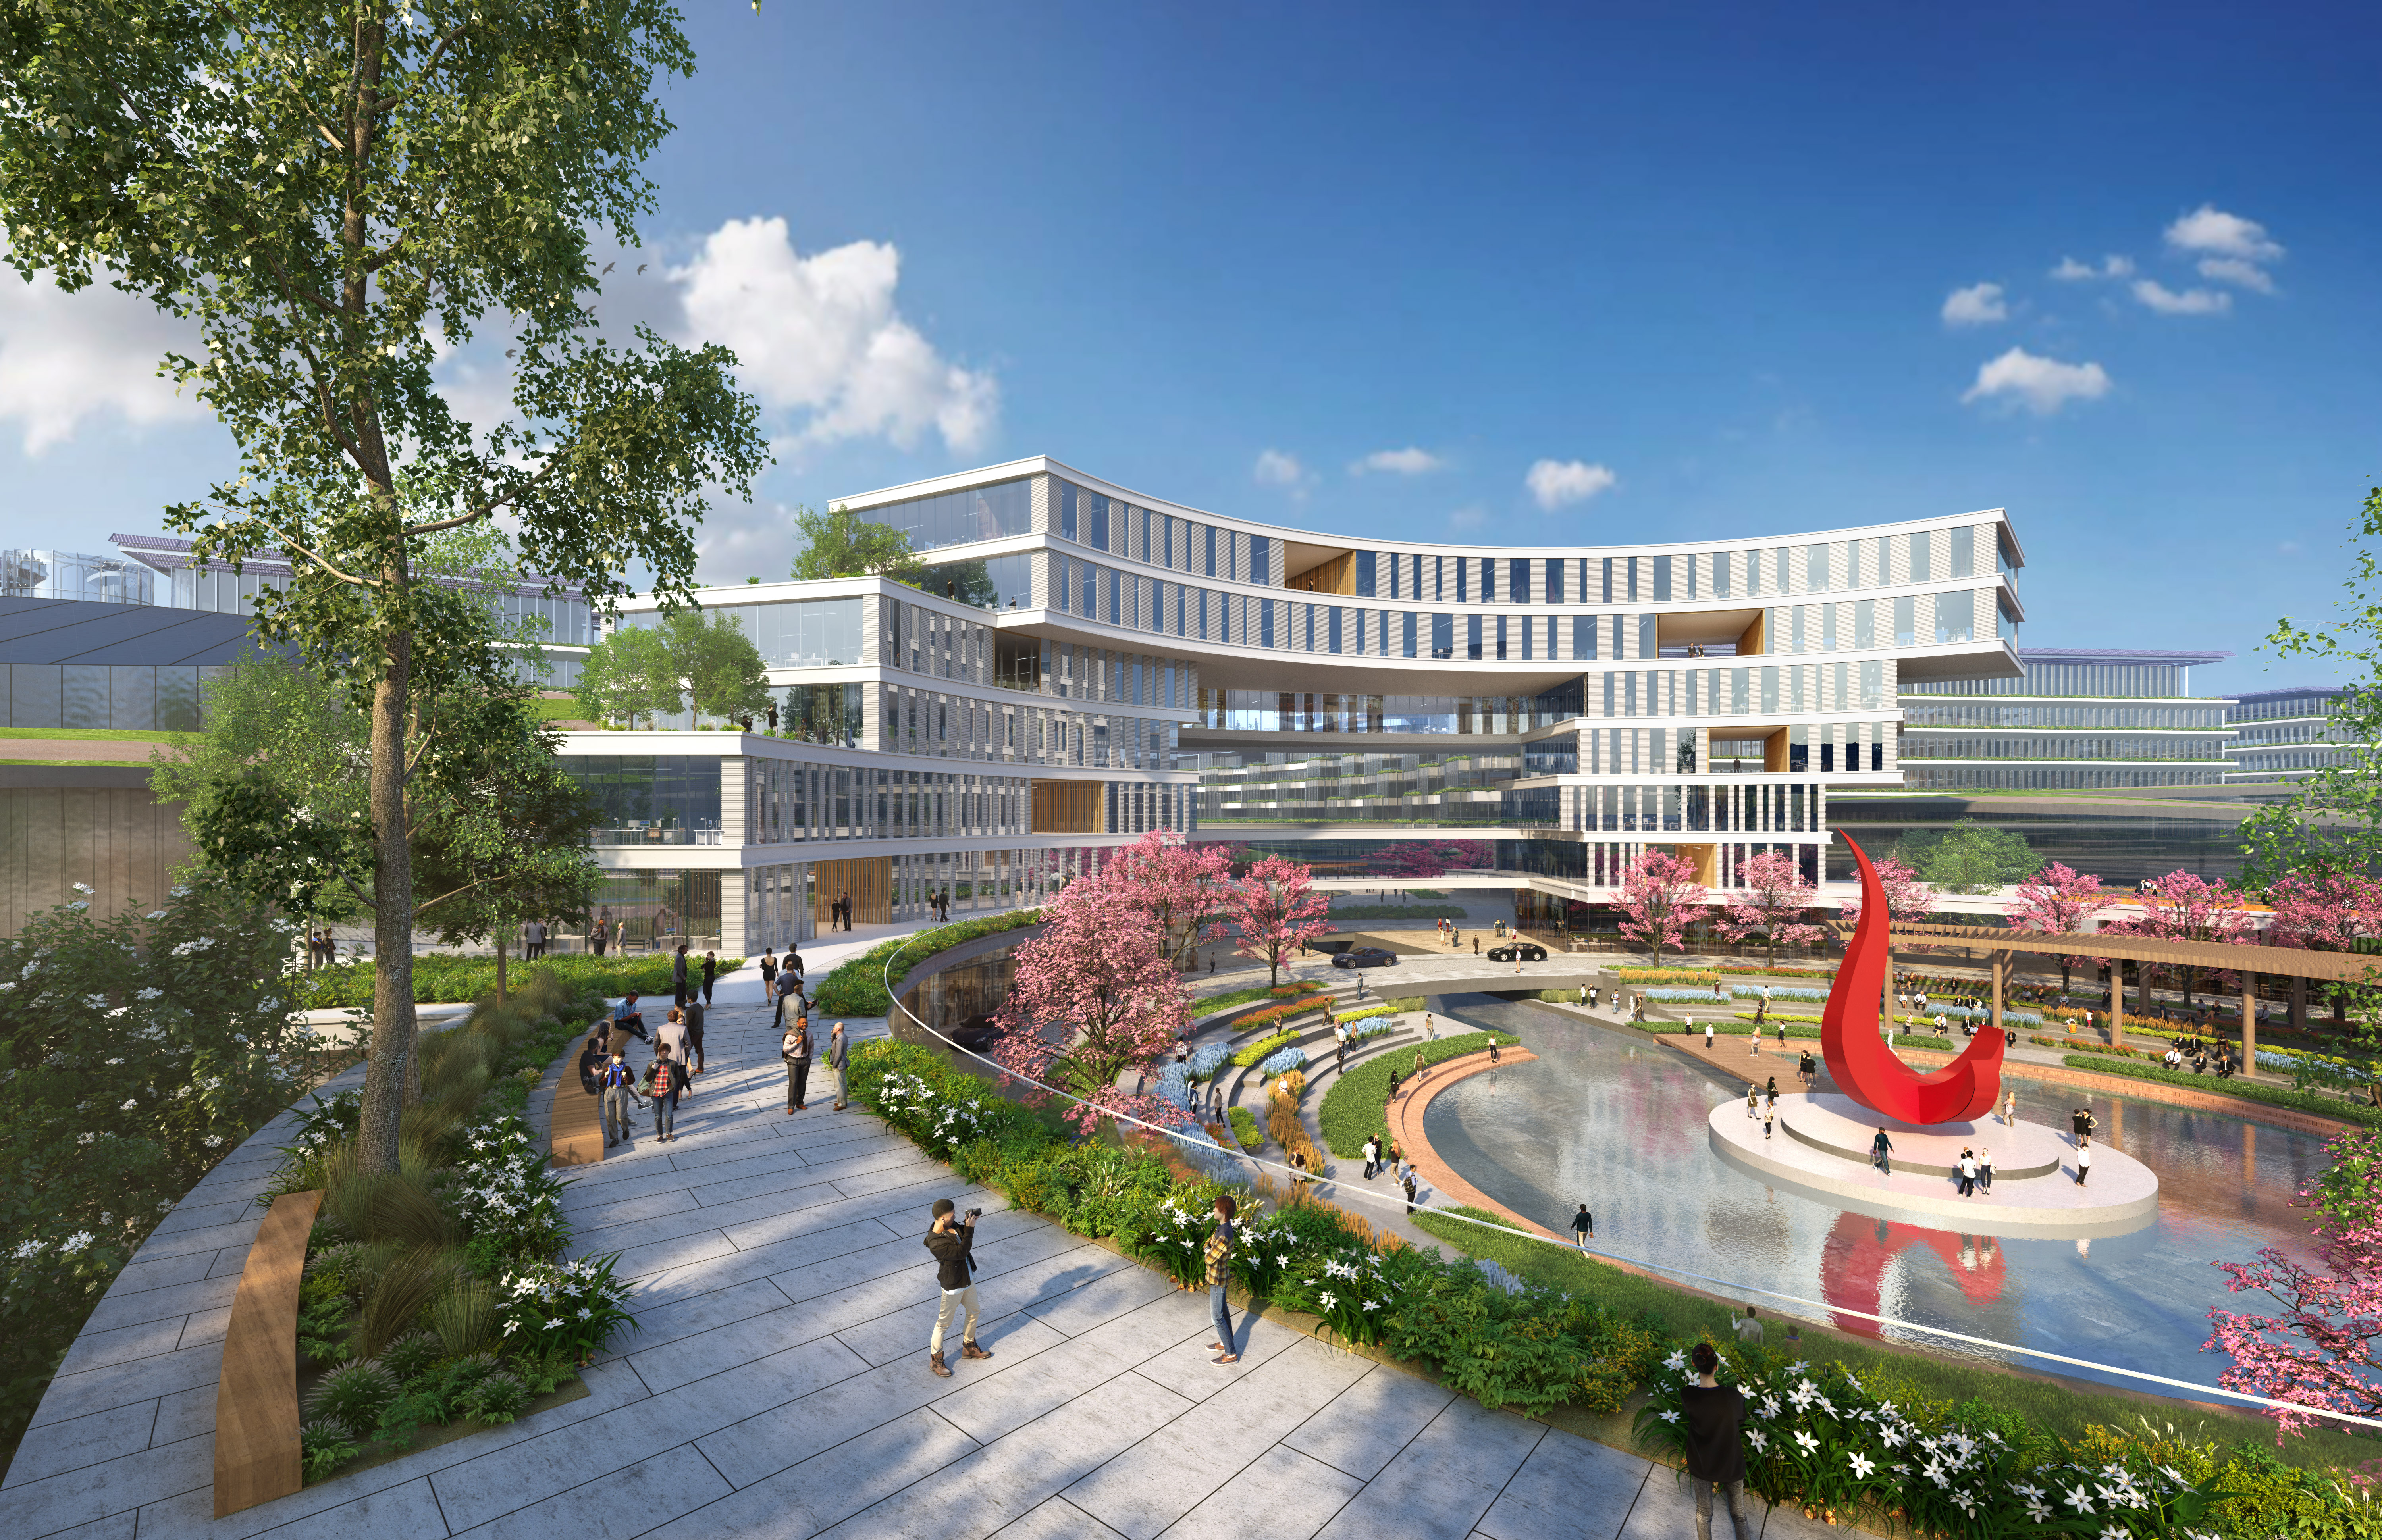 Intelligent transportation is one of the key research thrust areas of the proposed HKUST Guangzhou campus. The photo is an impression of the Guangzhou campus.